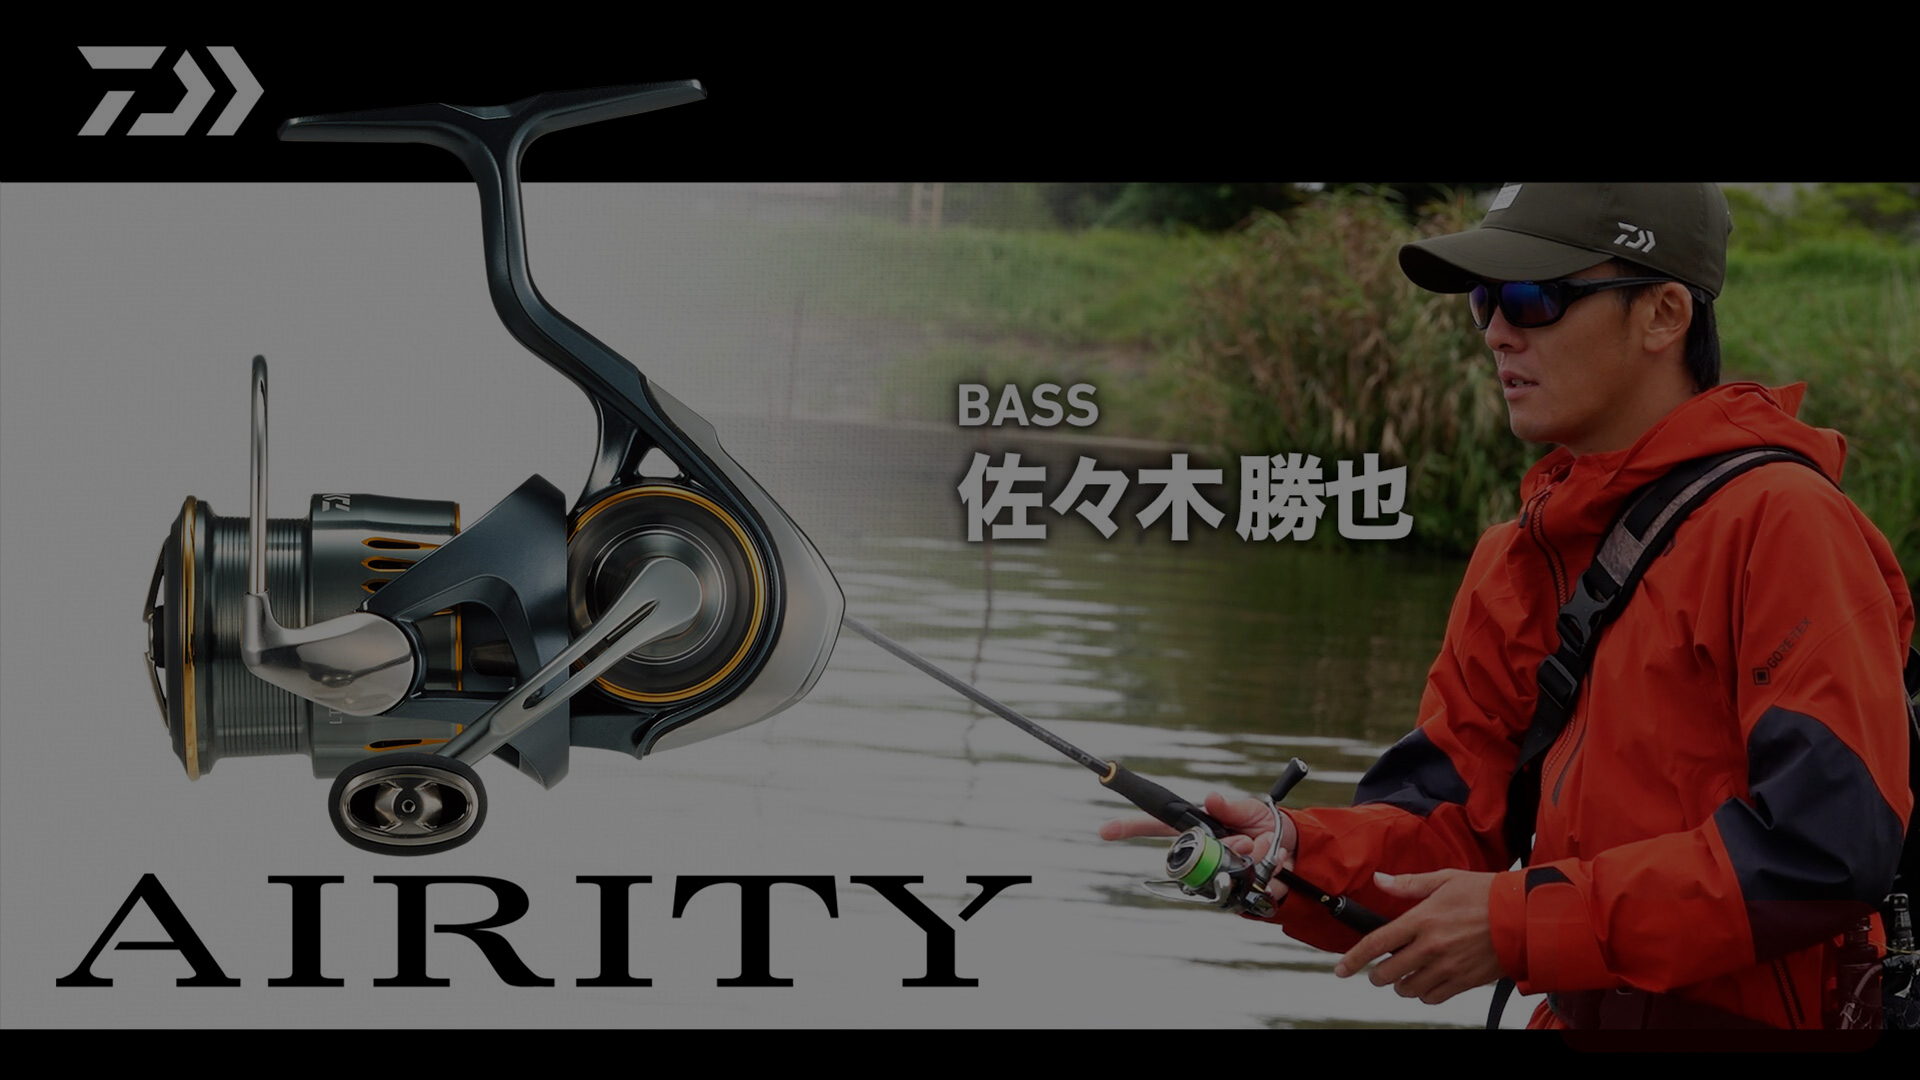 AIRITY for BASS 佐々木勝也